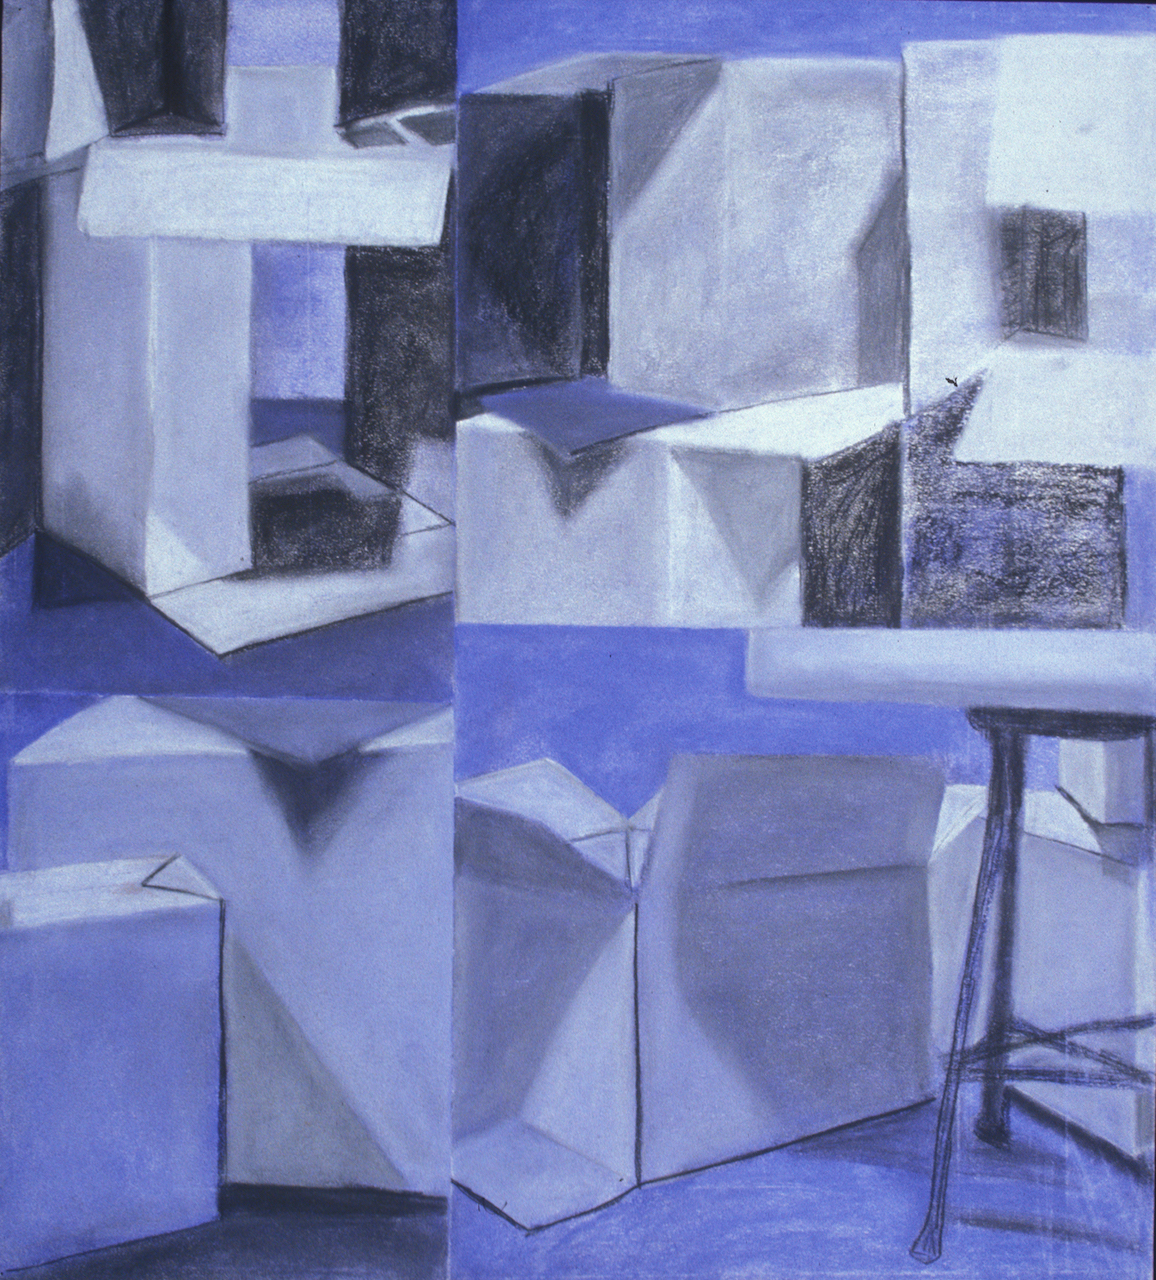 Still life with boxes